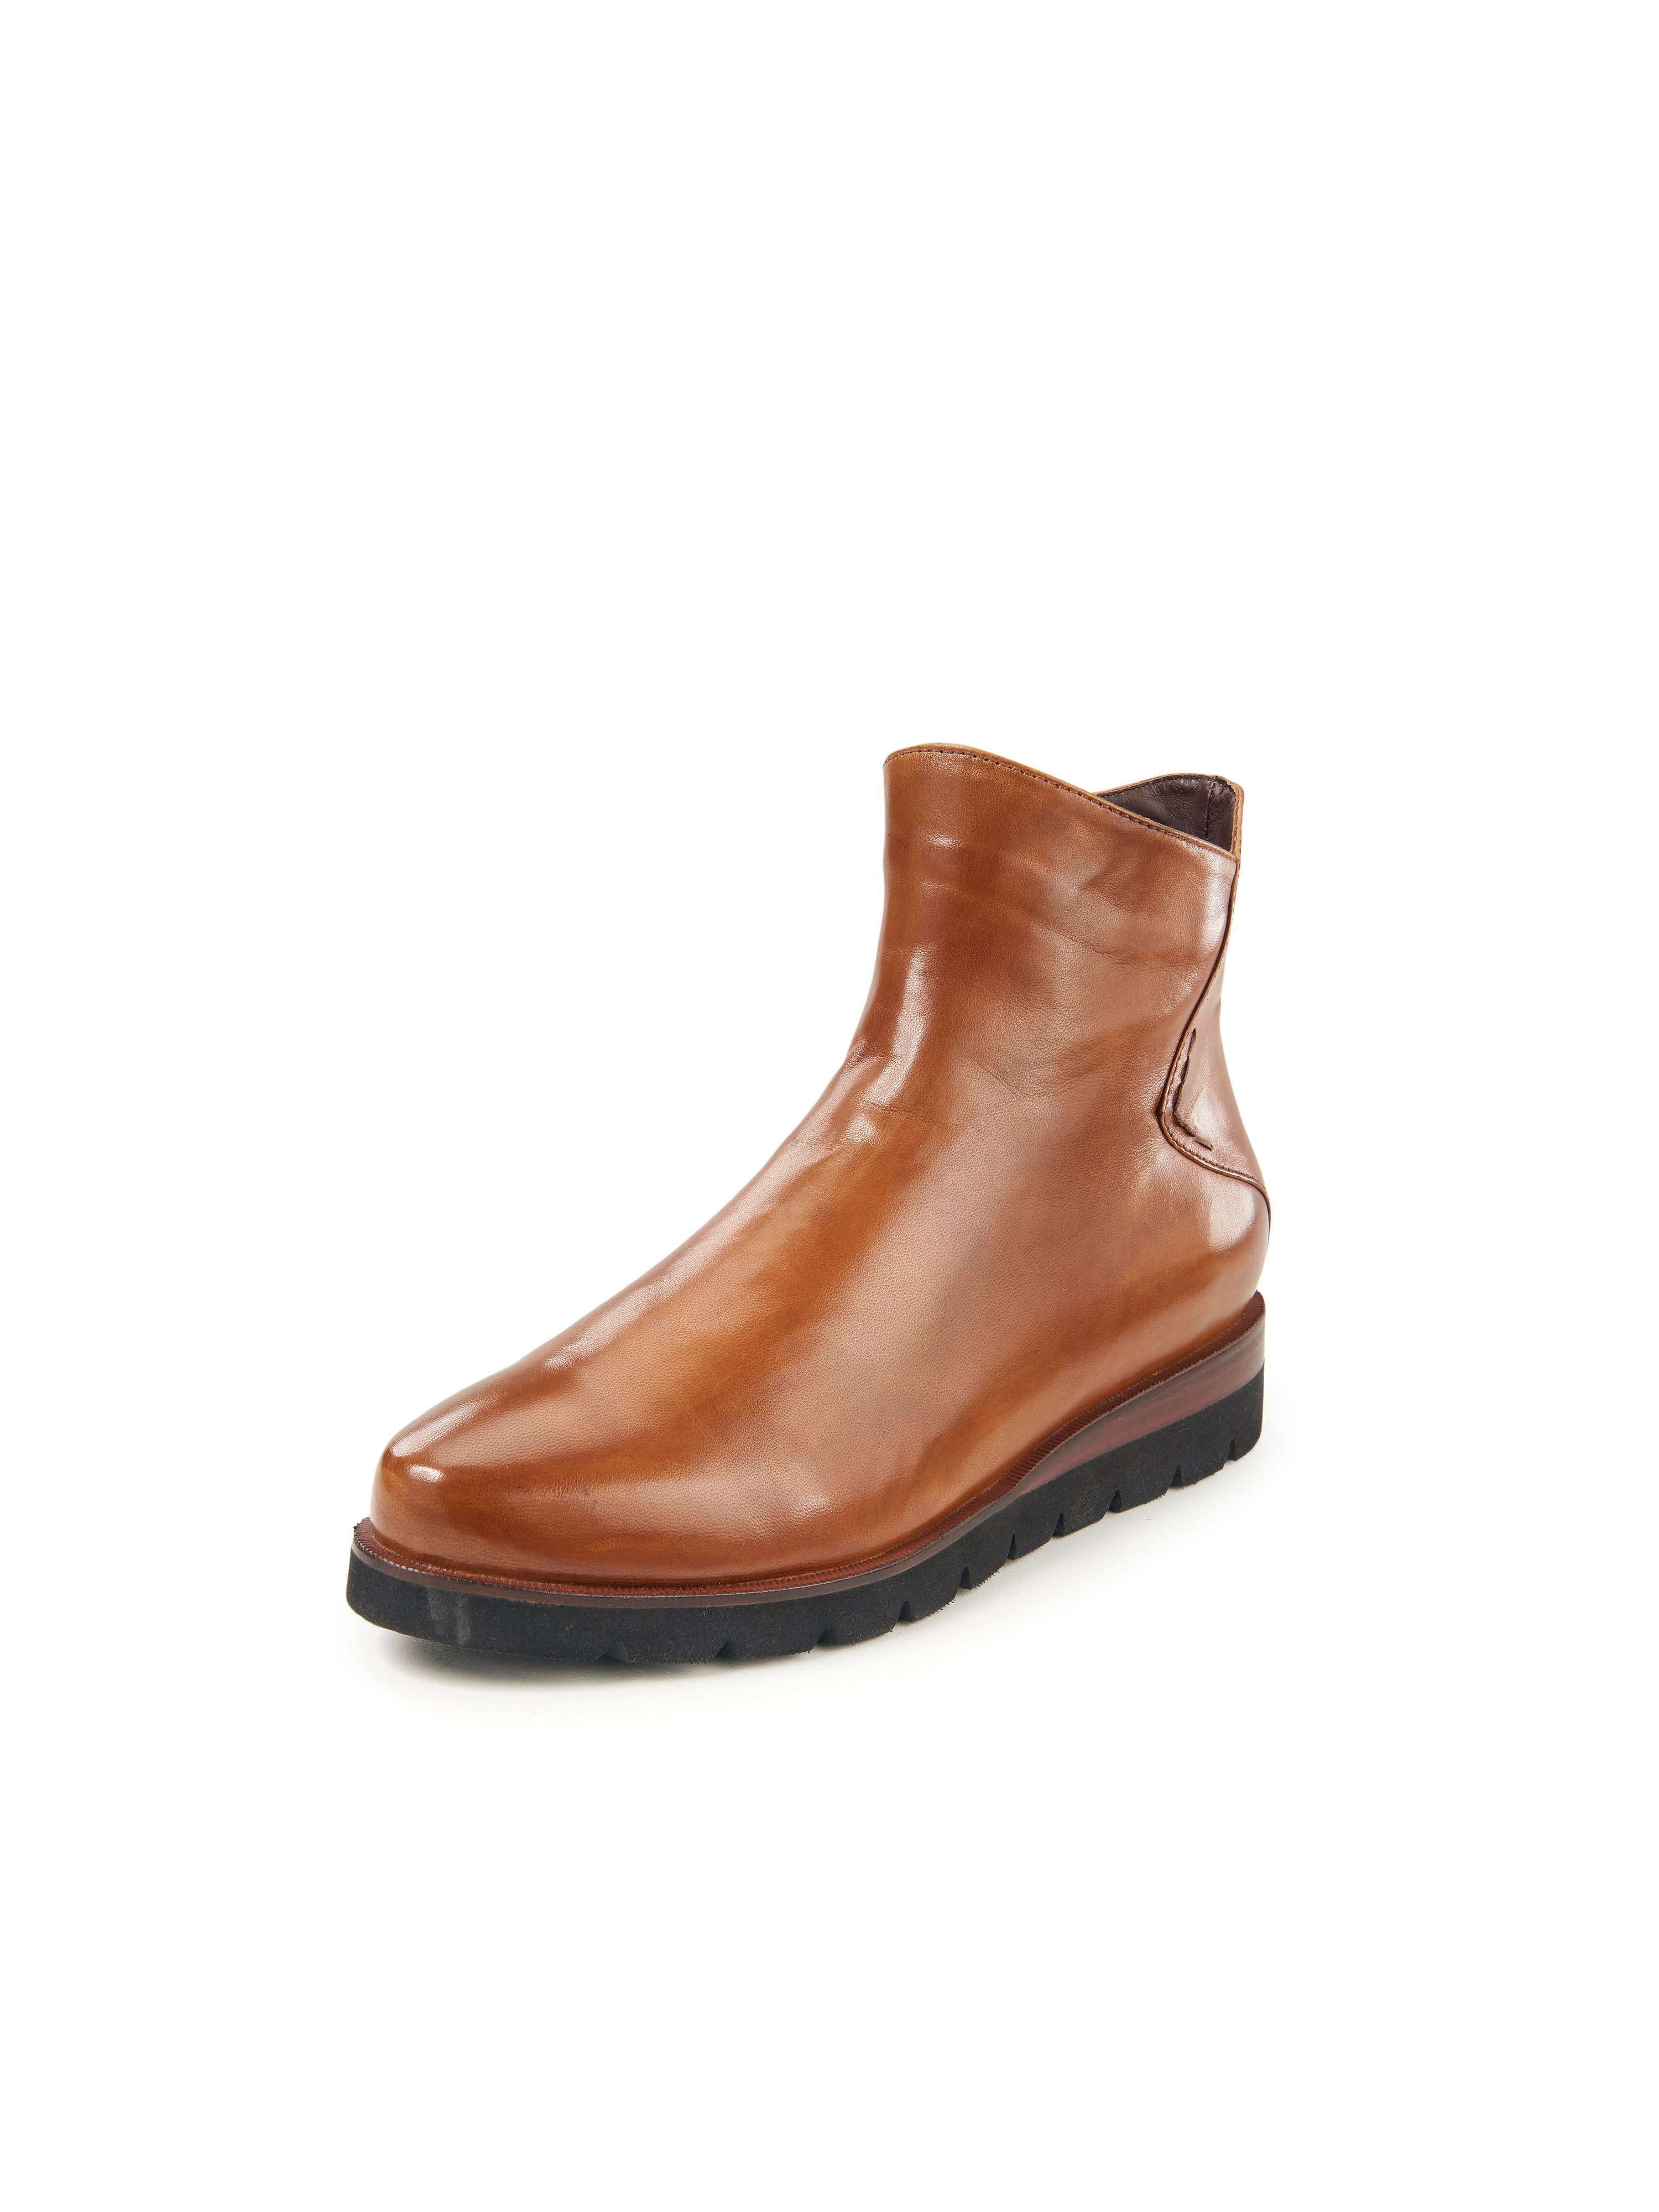 Les boots cuir nappa  EVERYBODY marron taille 39